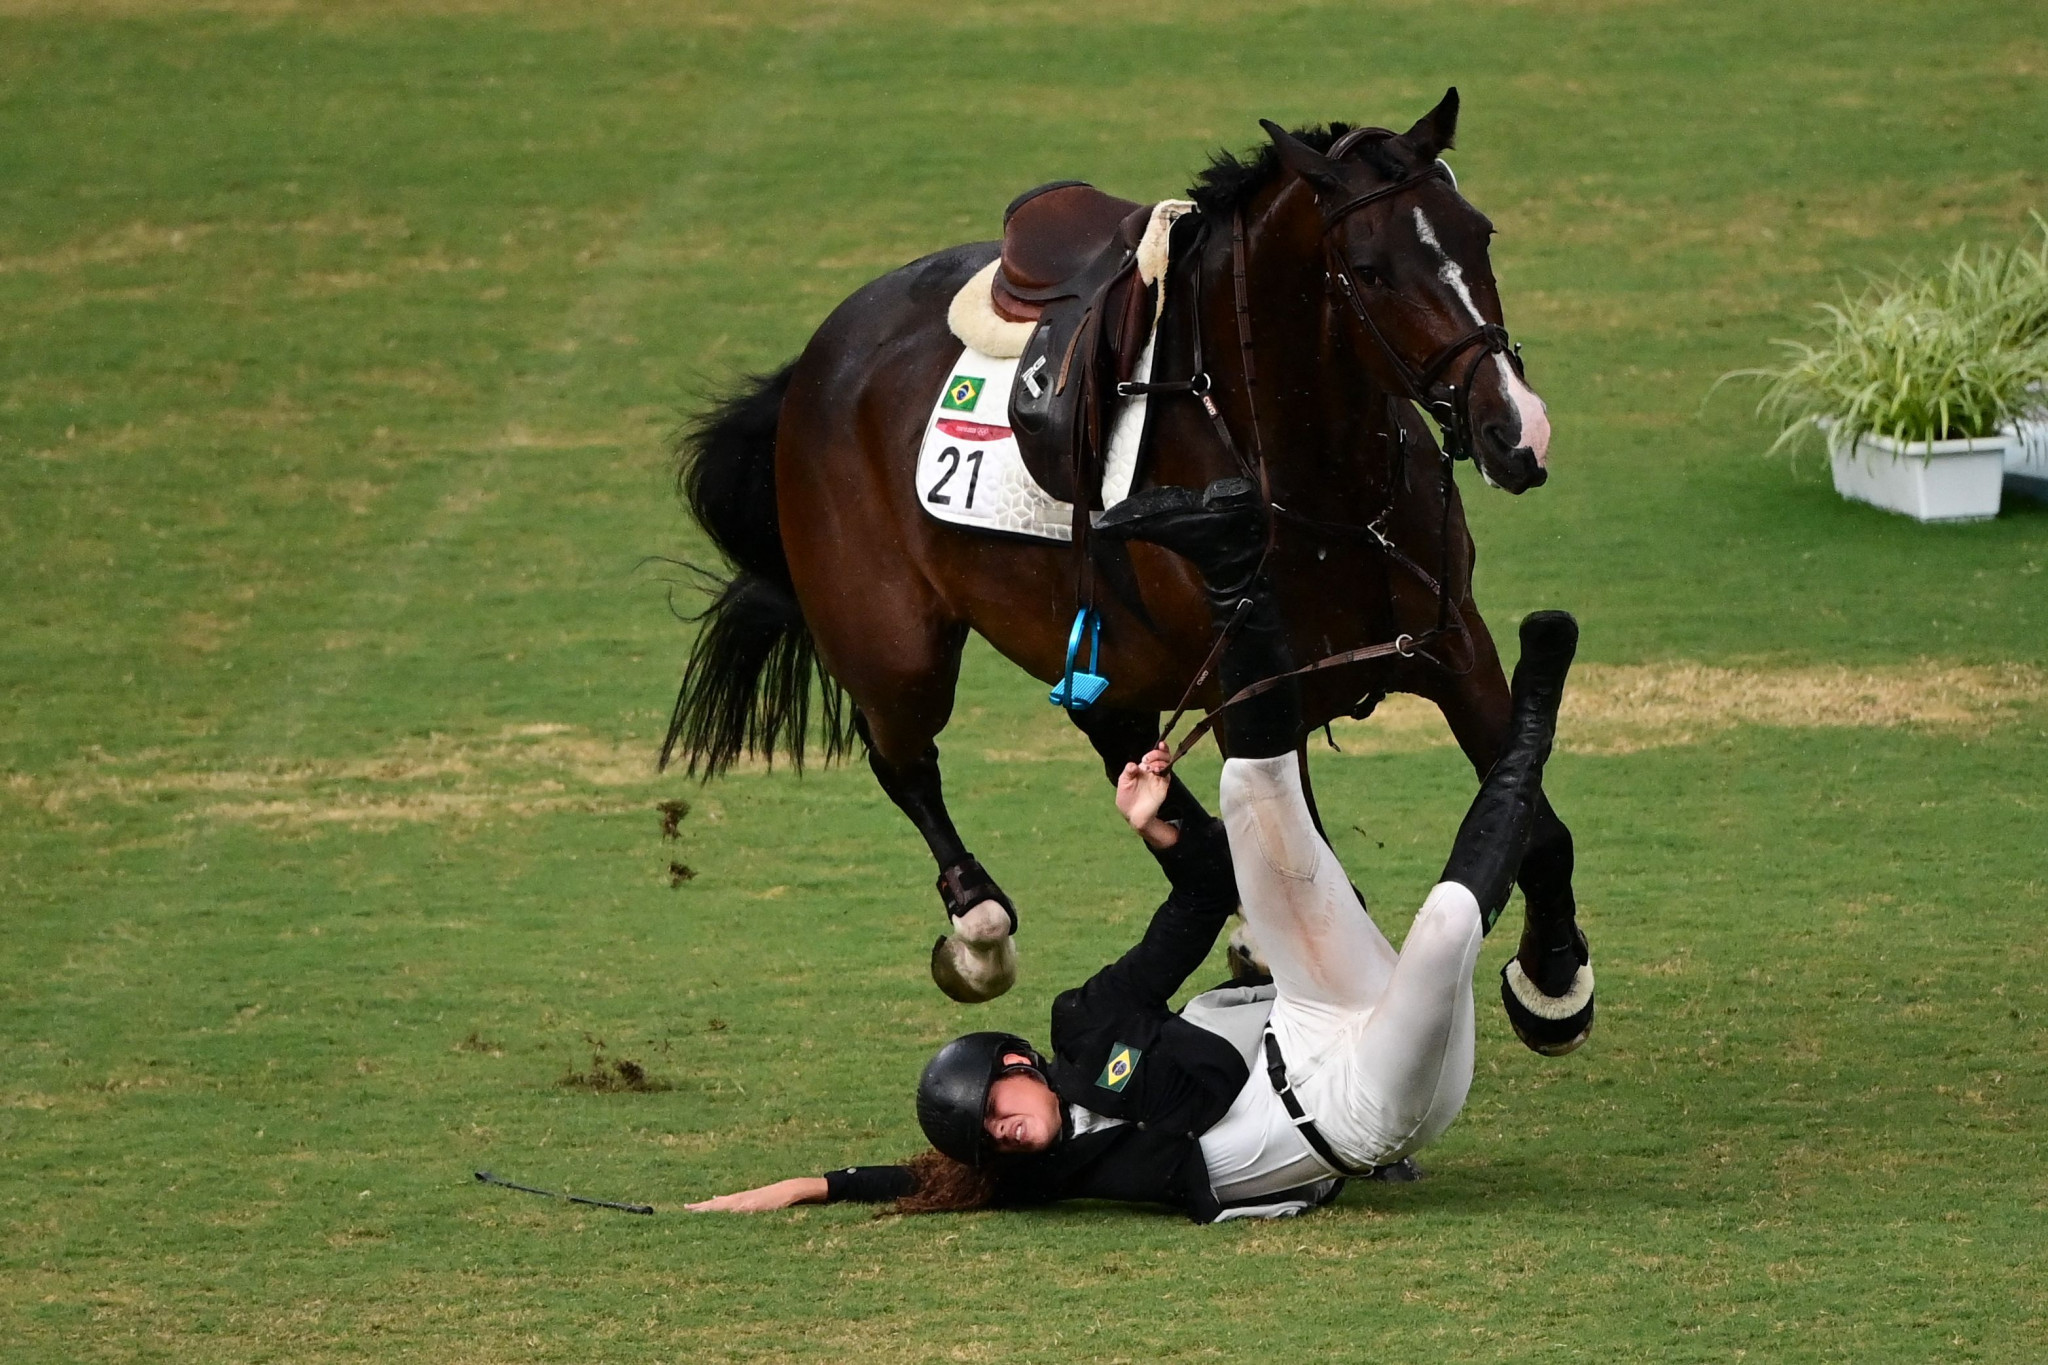 Brazil's Maria Ieda Chaves Guimaraes was among the athletes unseated during the modern pentathlon riding section at Tokyo 2020 ©Getty Images